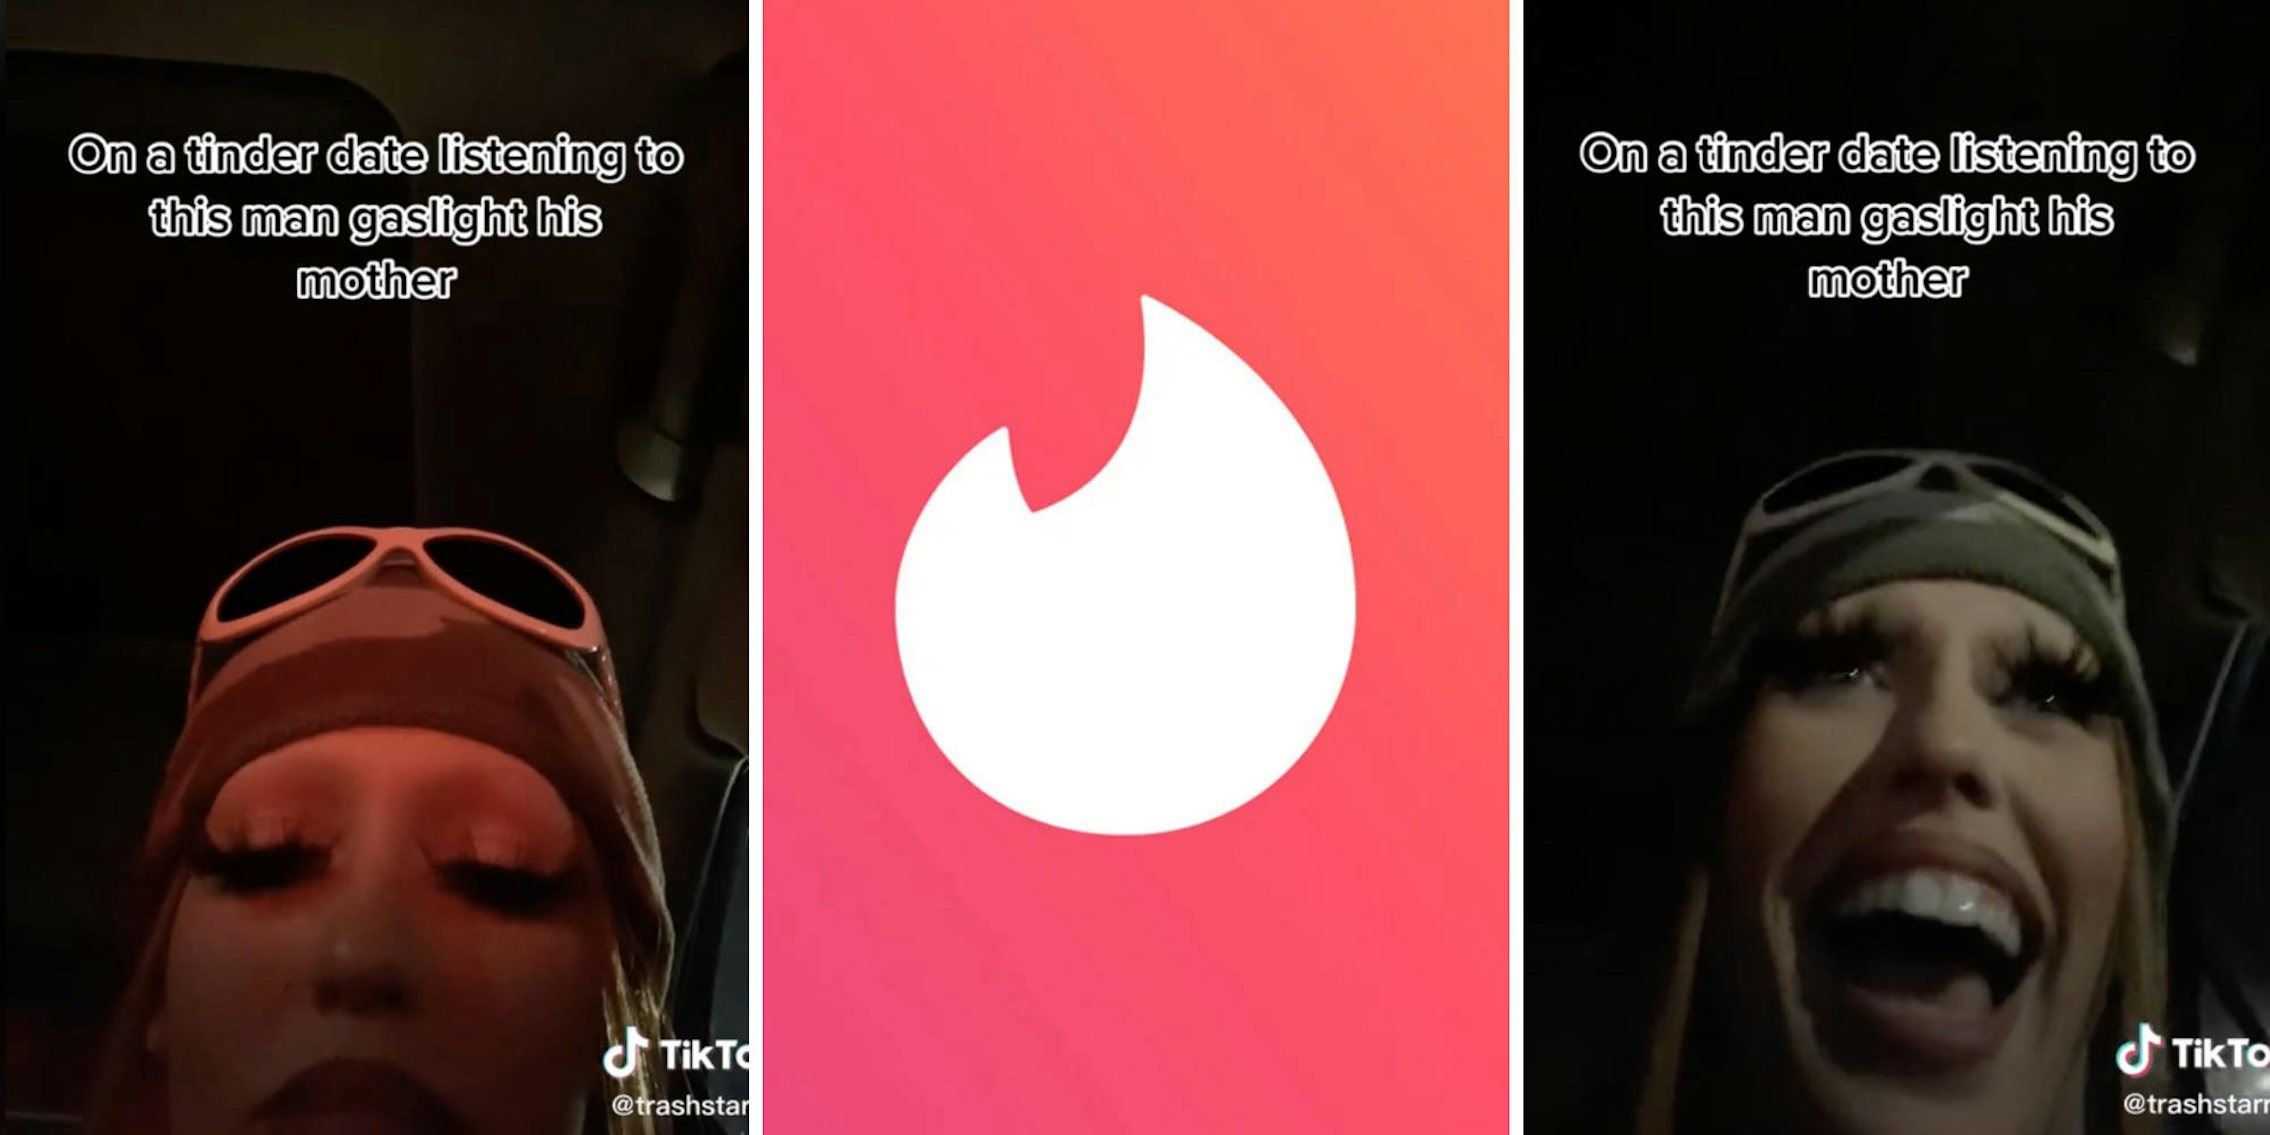 woman listening to phone (l) tinder logo (m) woman laughing (r)